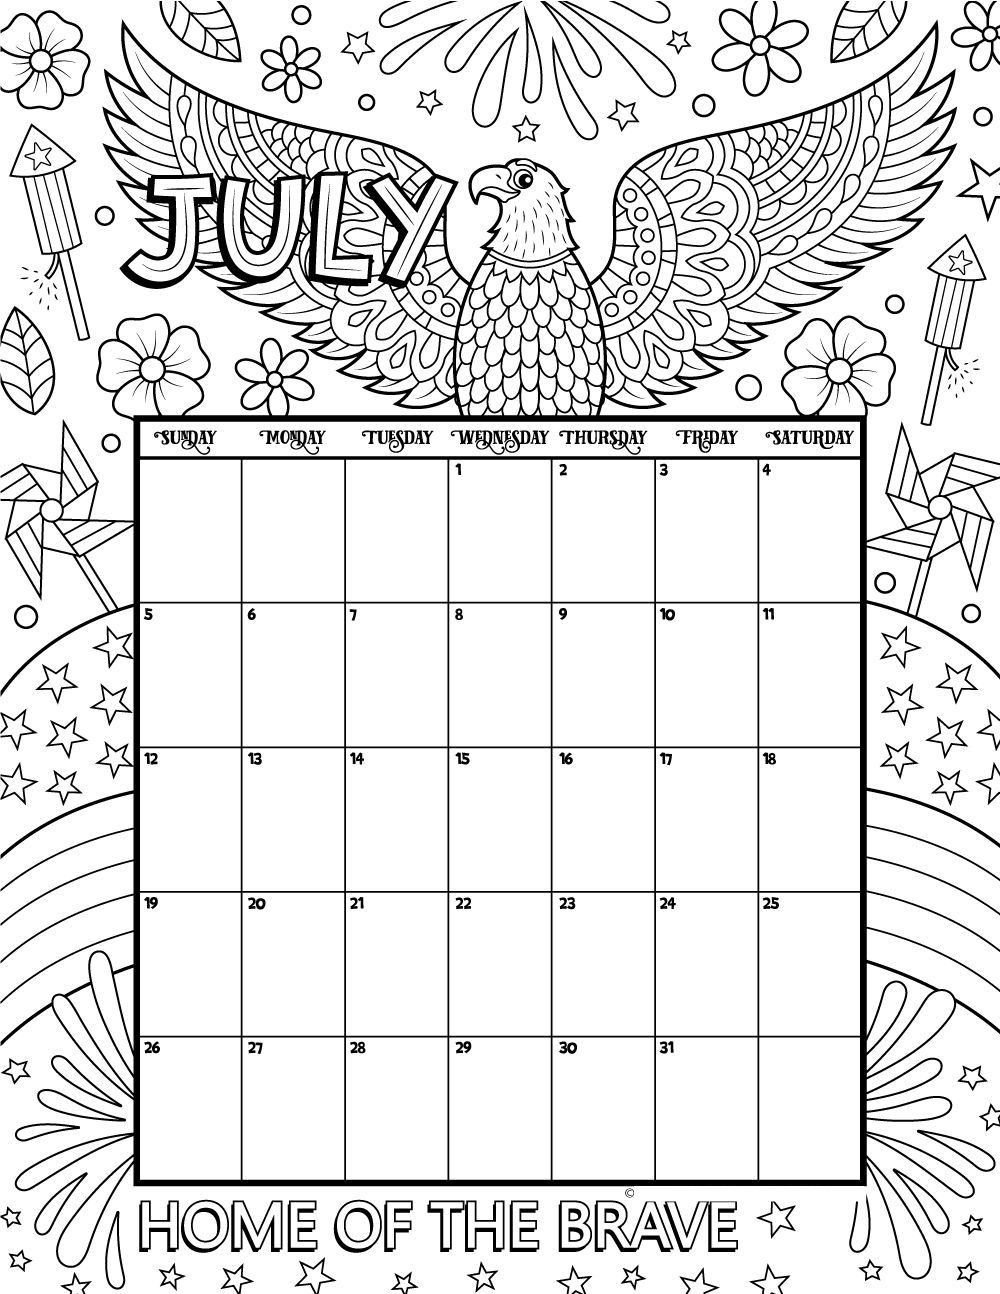 July Calendar Coloring Pages Coloring Pages Coloring Pages For Kids